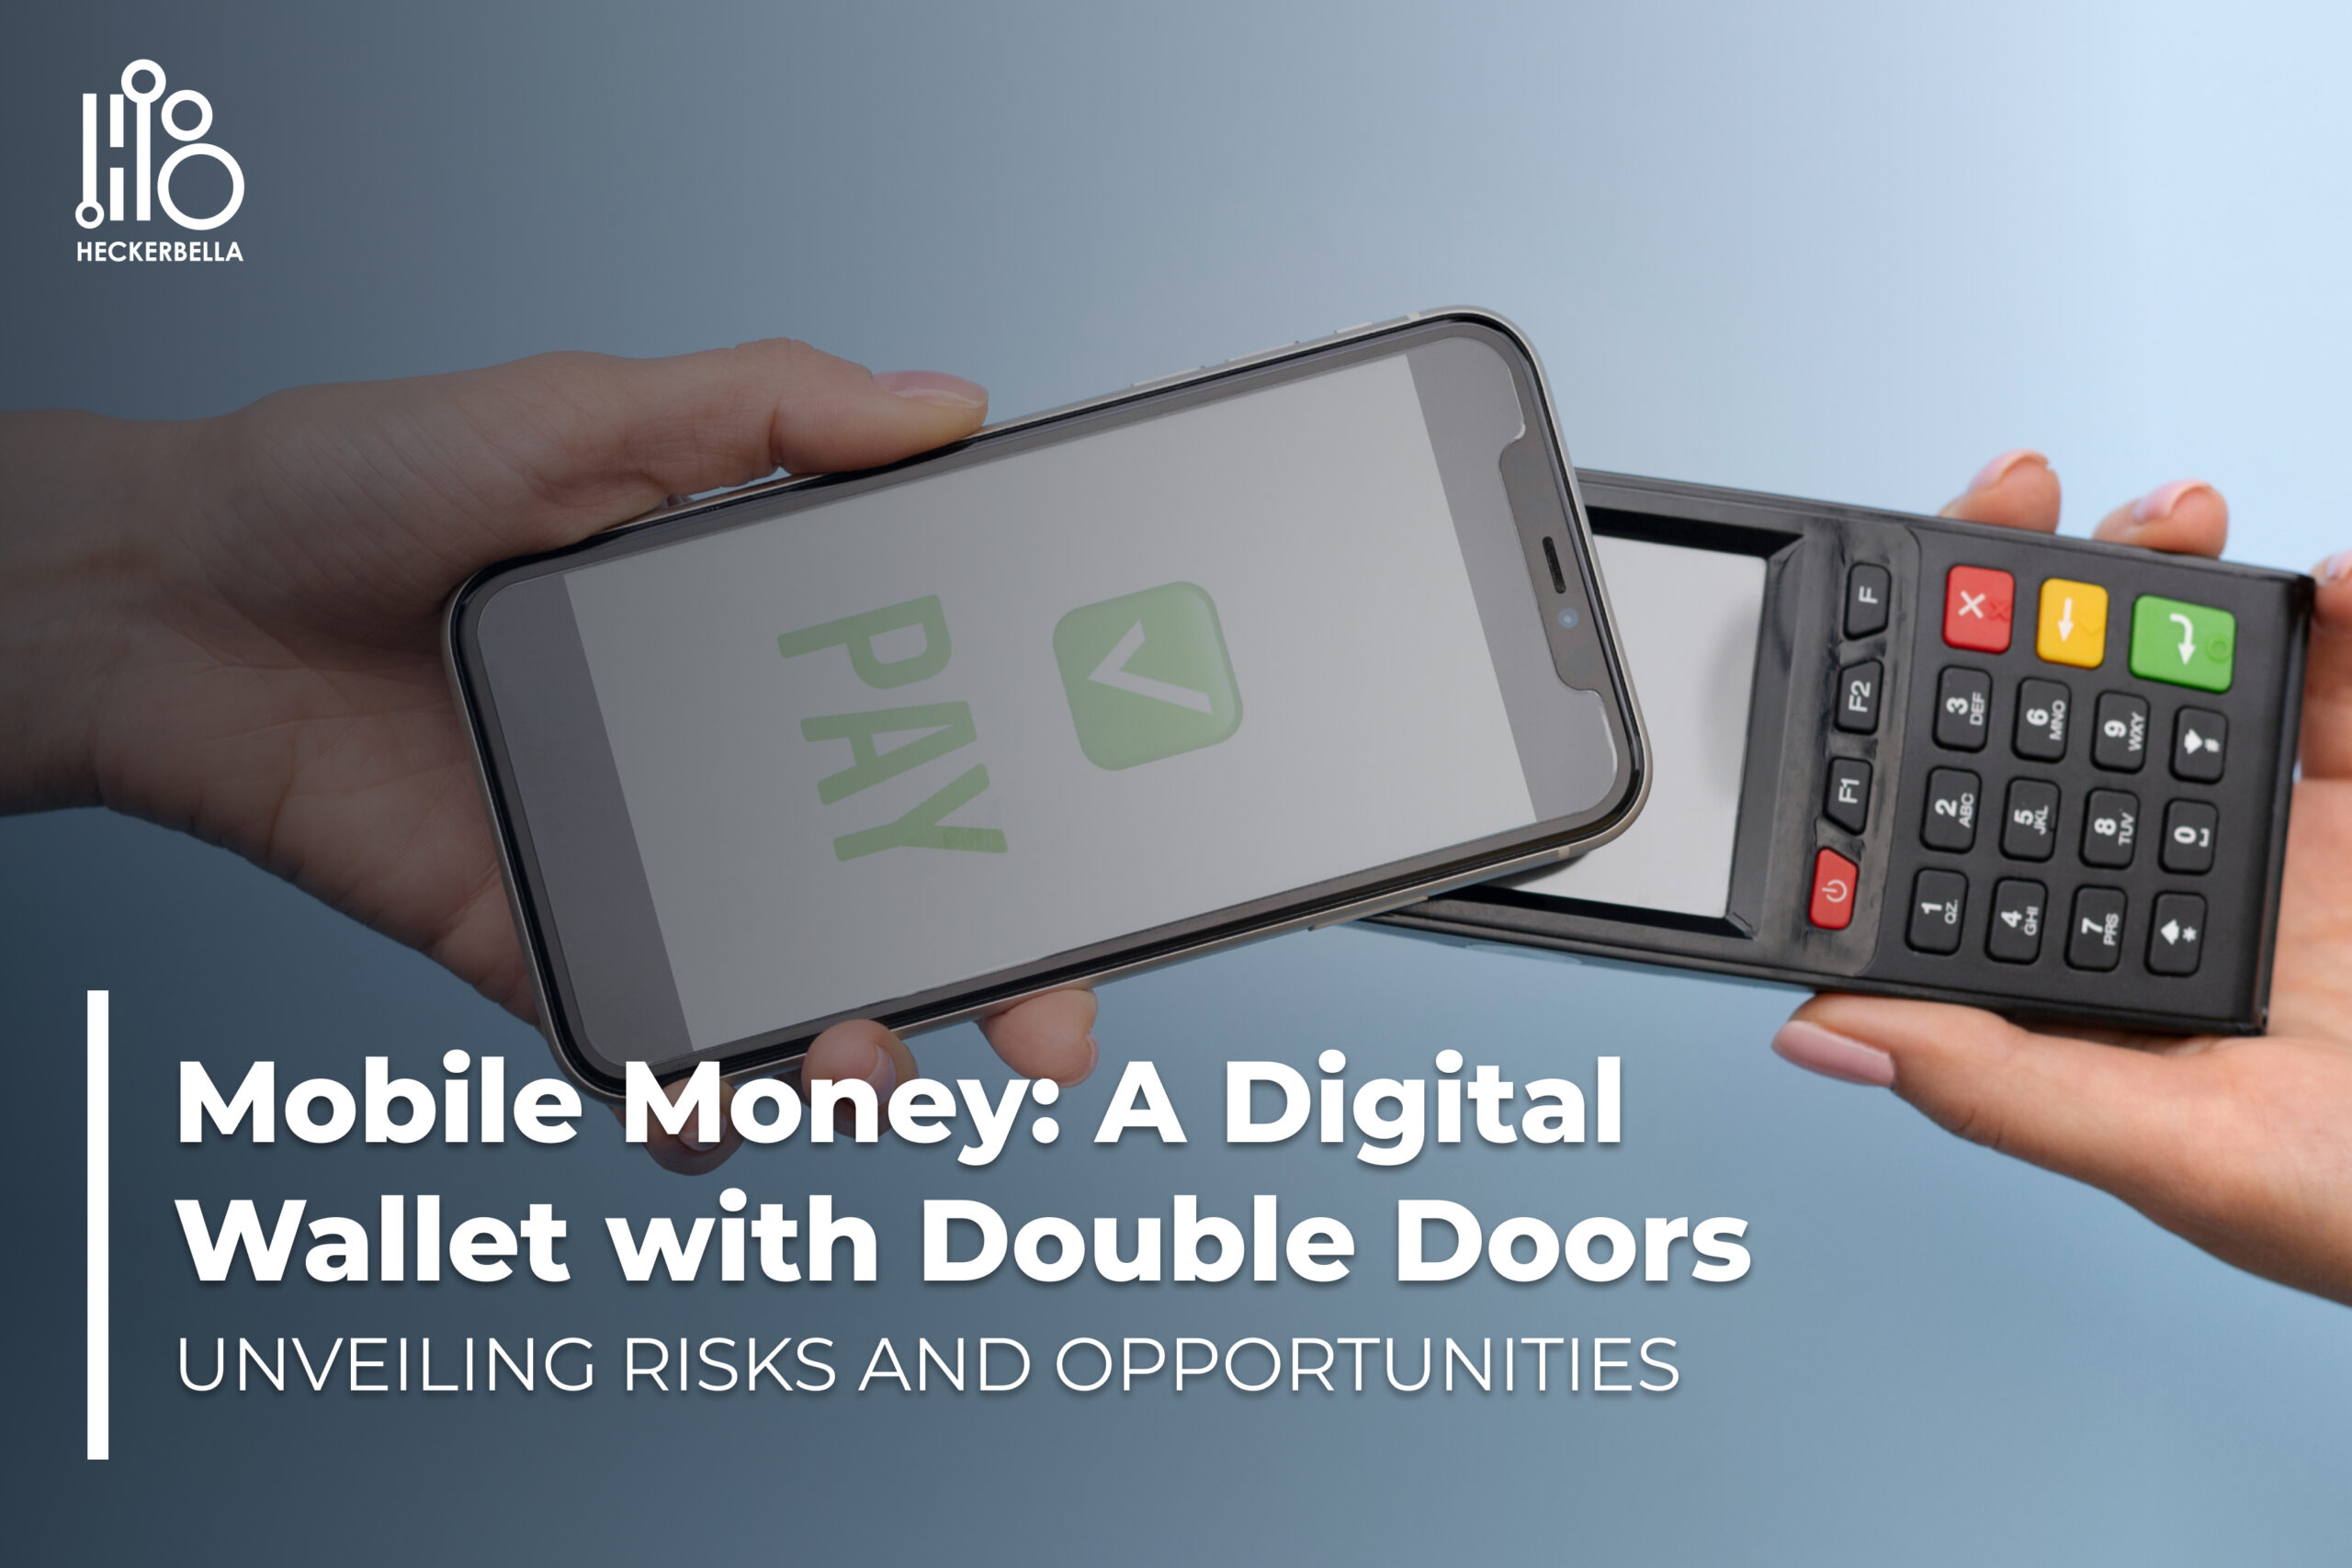 Mobile Money: A Digital Wallet with Double Doors – Unveiling Risks and Opportunities.